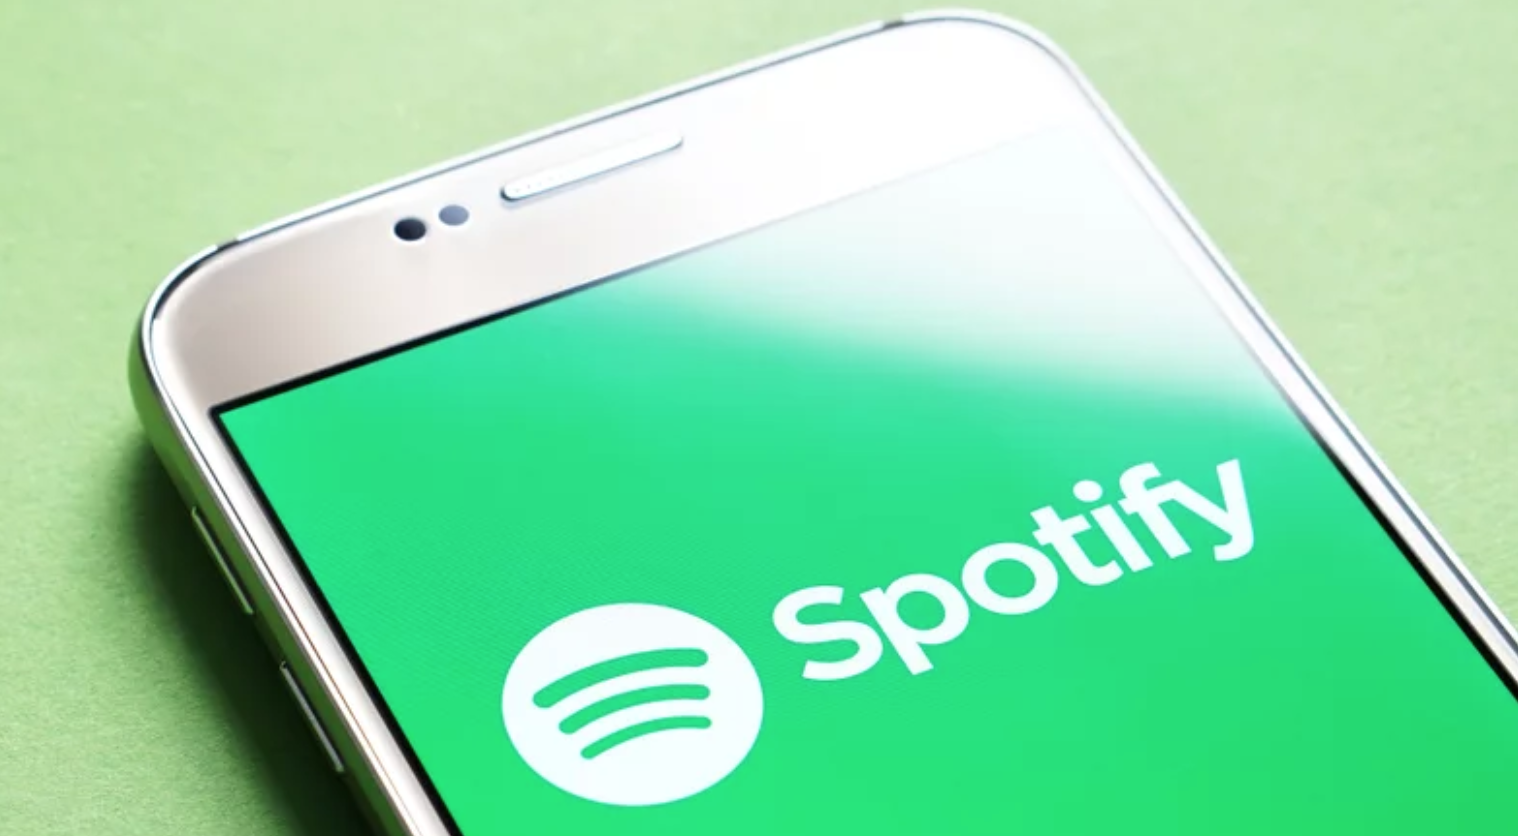 The spotify app on a smartphone